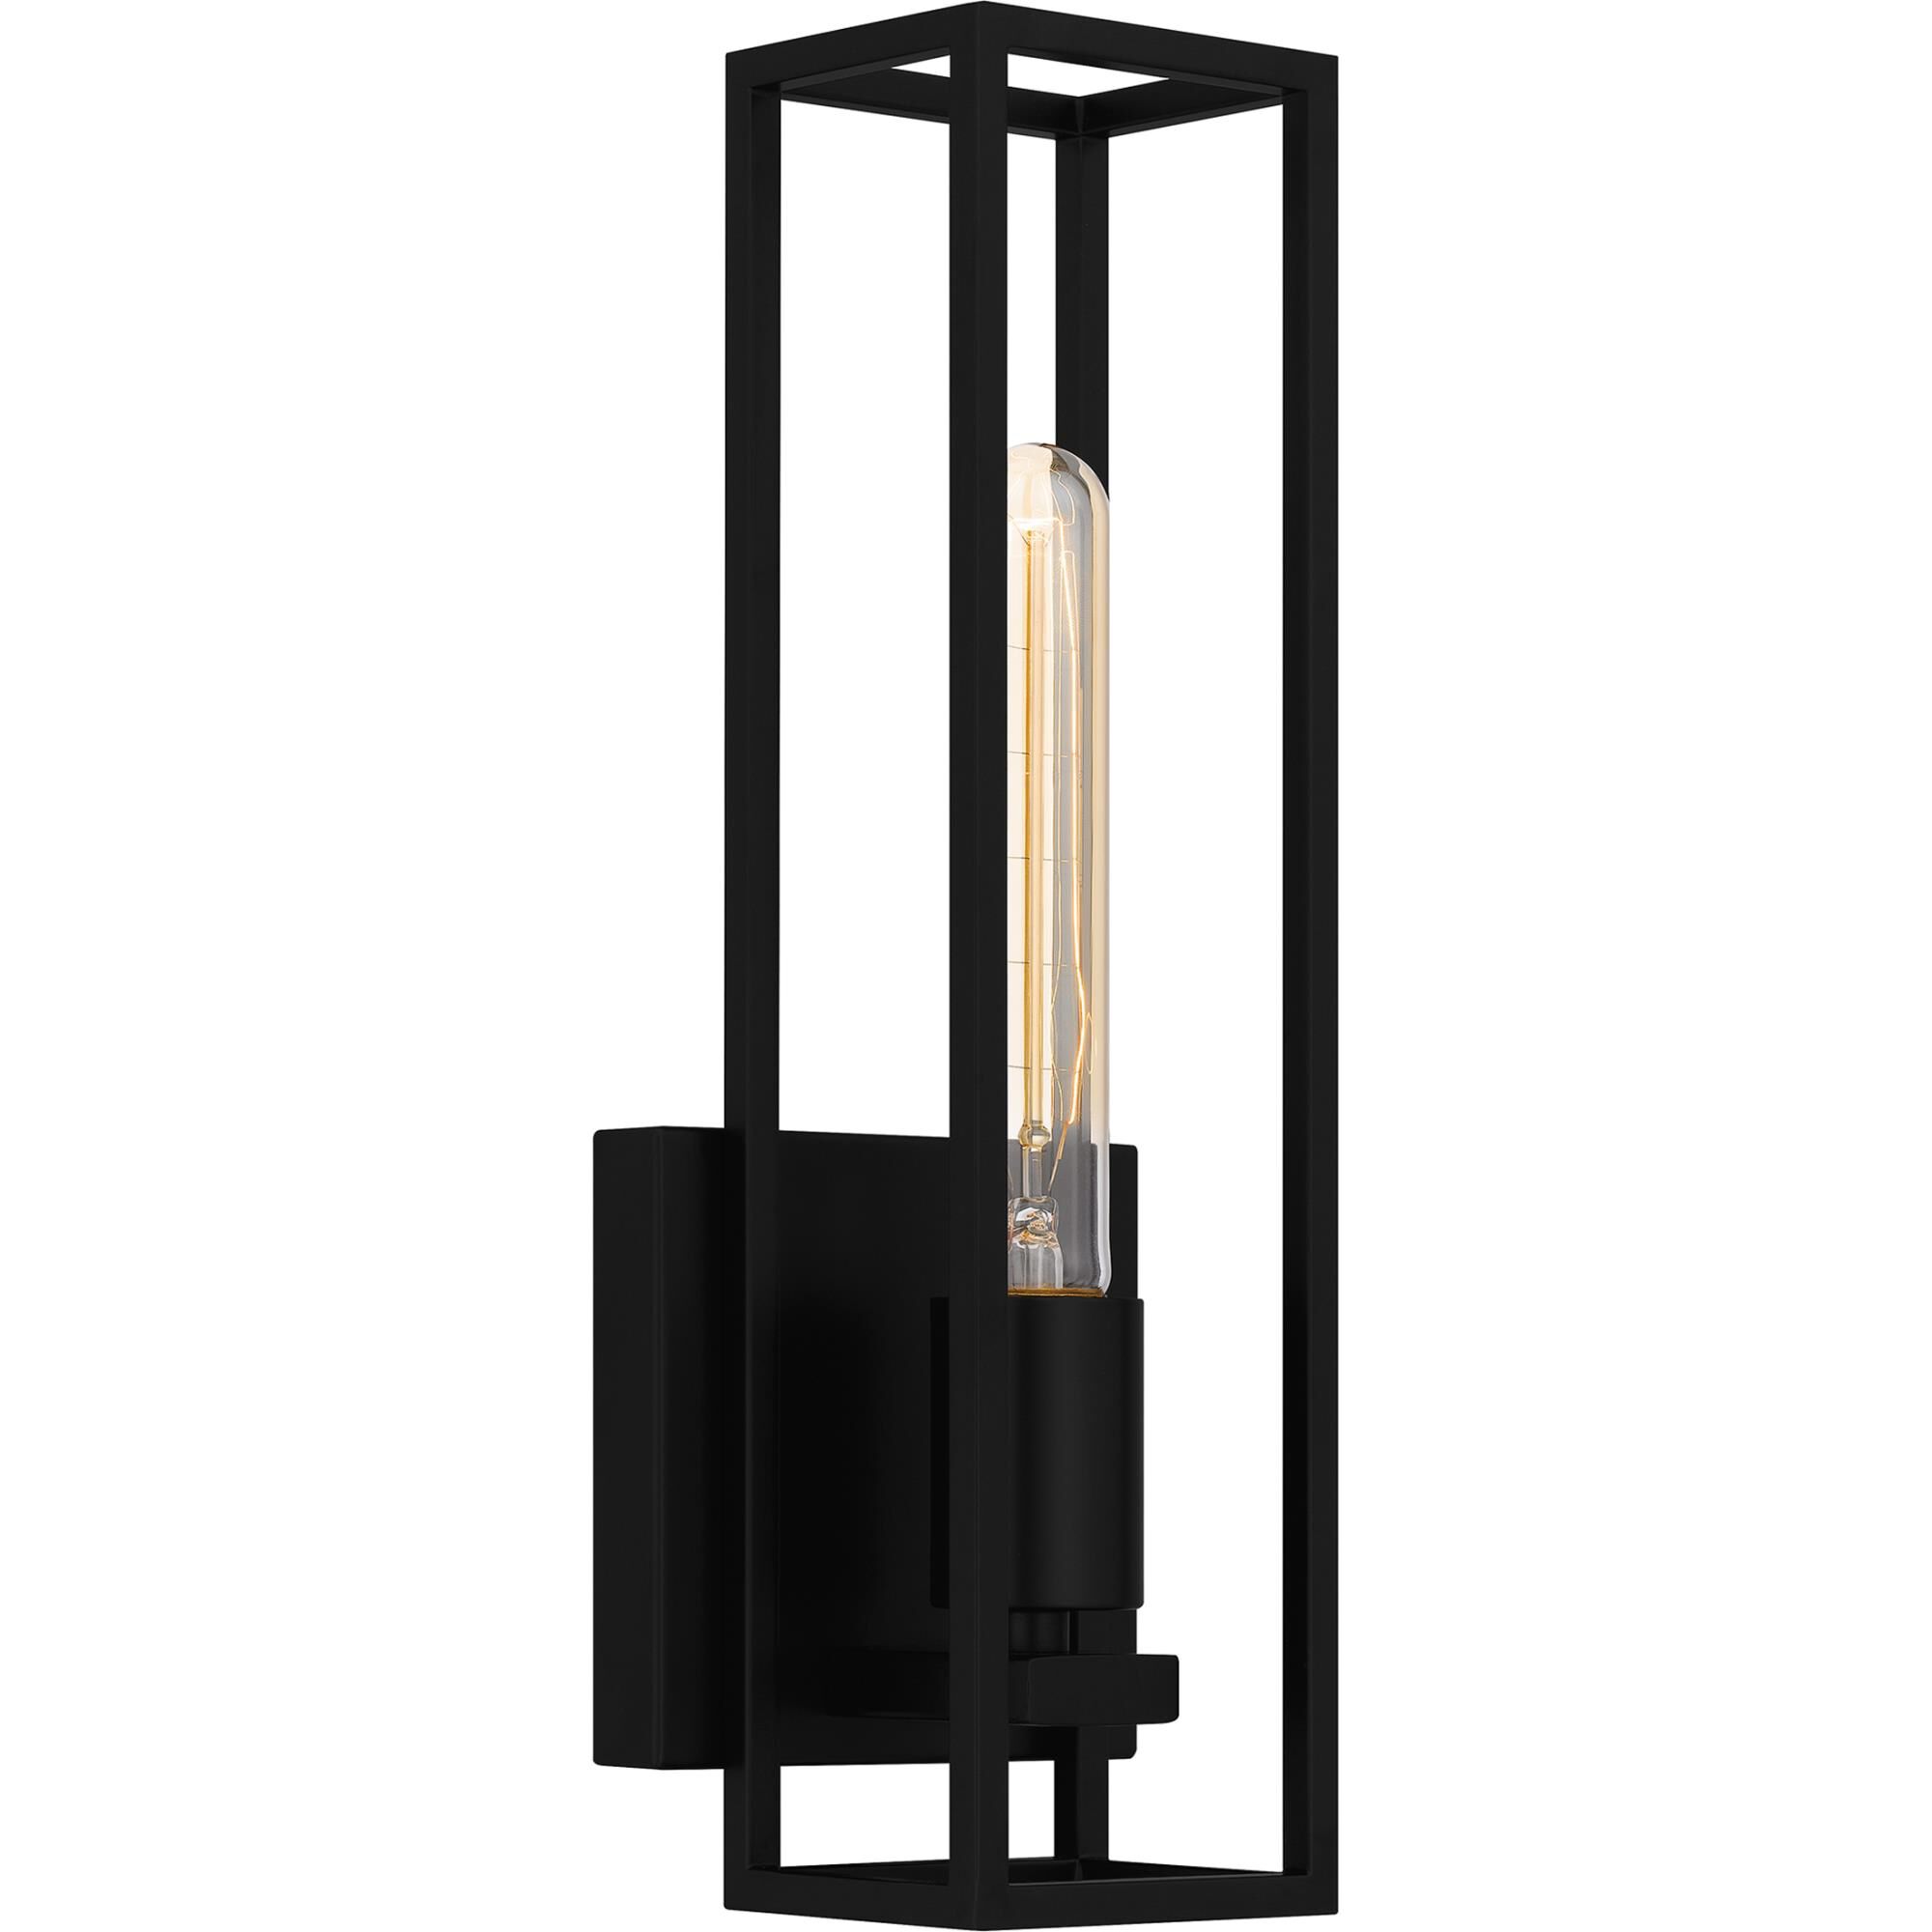 Photos - Chandelier / Lamp Quoizel Leighton 13 Inch Wall Sconce Leighton - LGN8605MBK - Modern Contem 